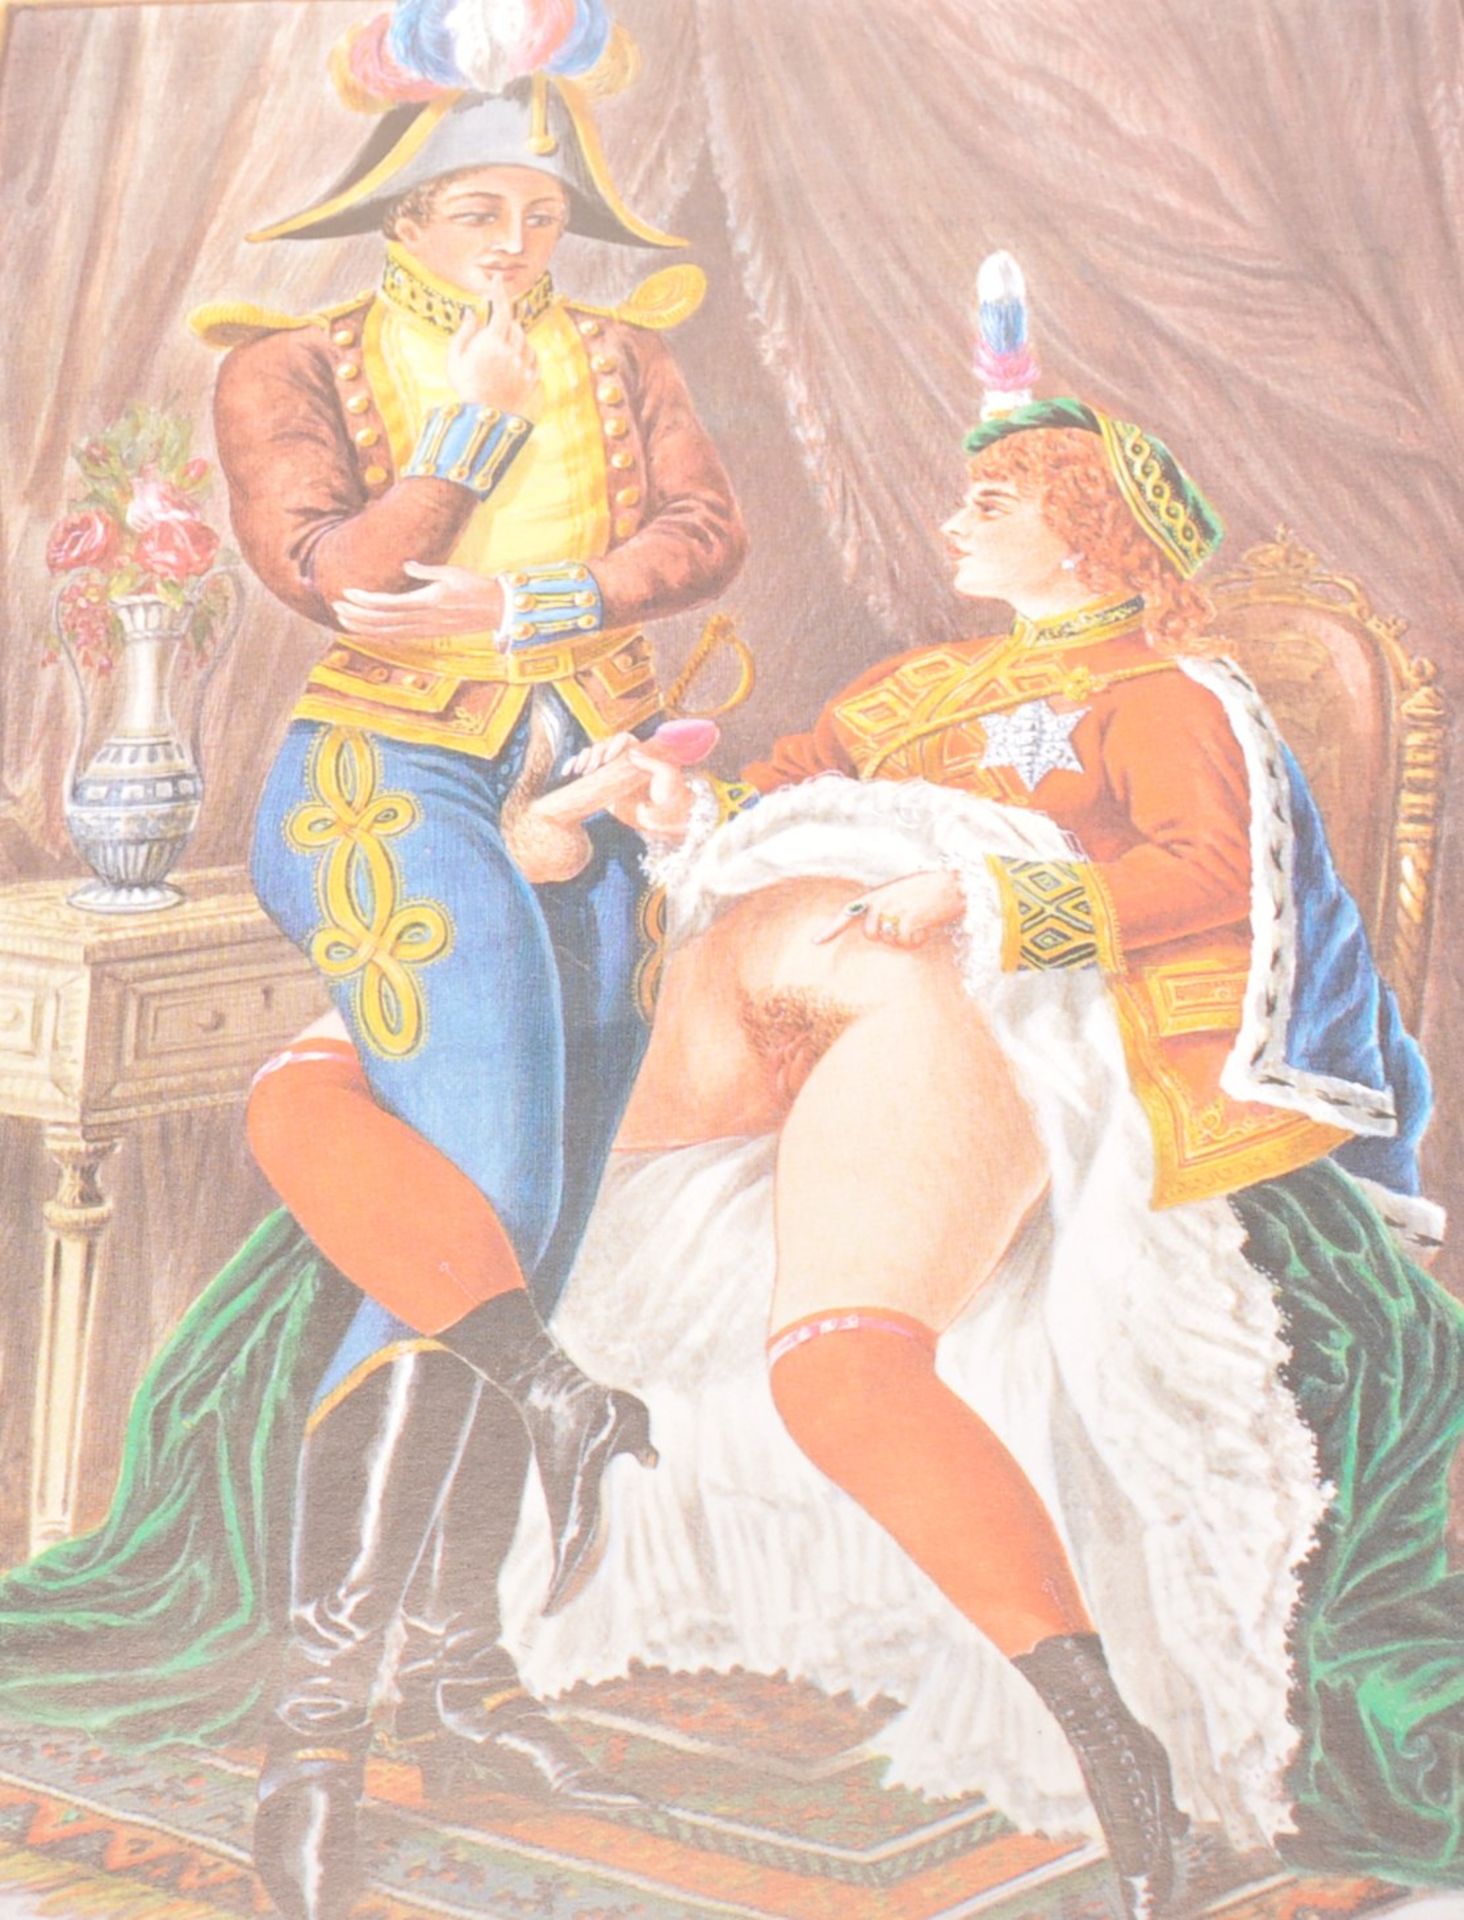 A collection of 5 unusual erotic prints of 19th Century soldiers and maidens in explicit - Bild 5 aus 6